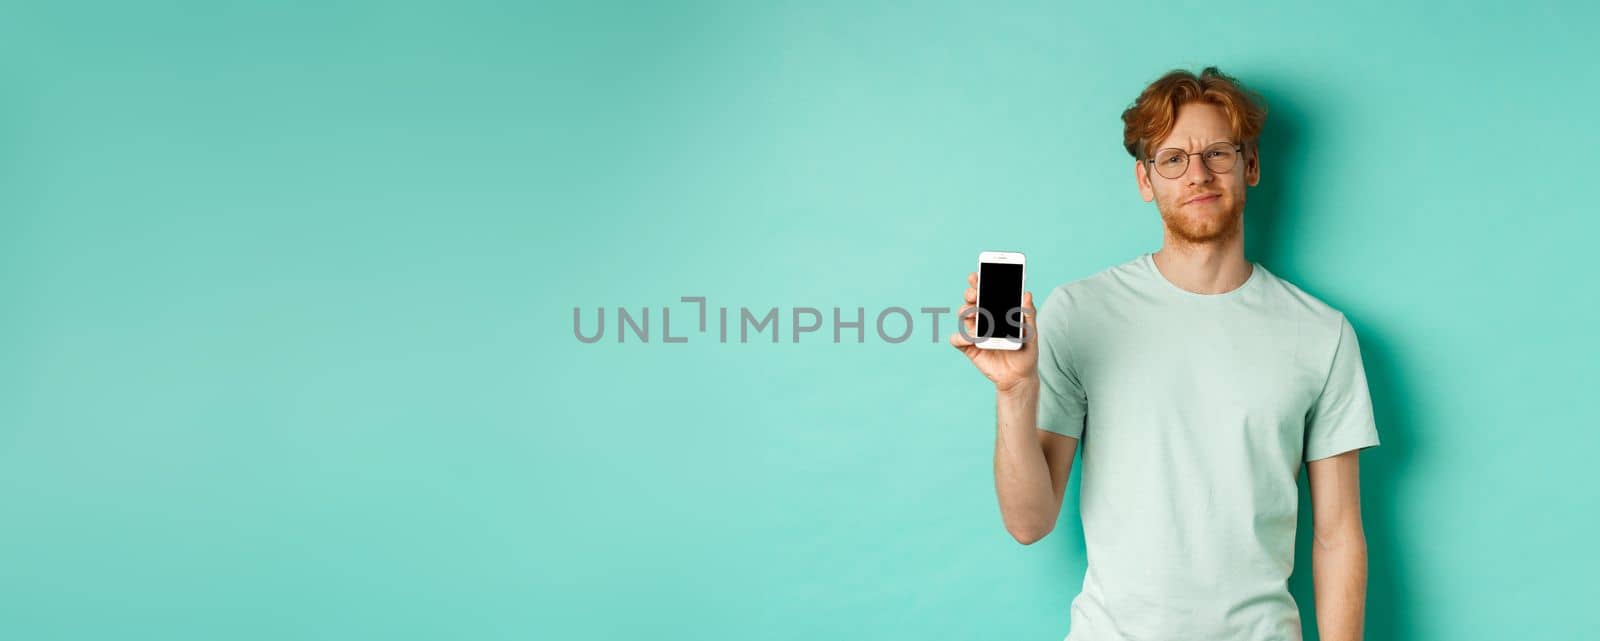 Skeptical male model with red hair and glasses, showing mobile screen and frowning disappointed, dislike application, standing over turquoise background.